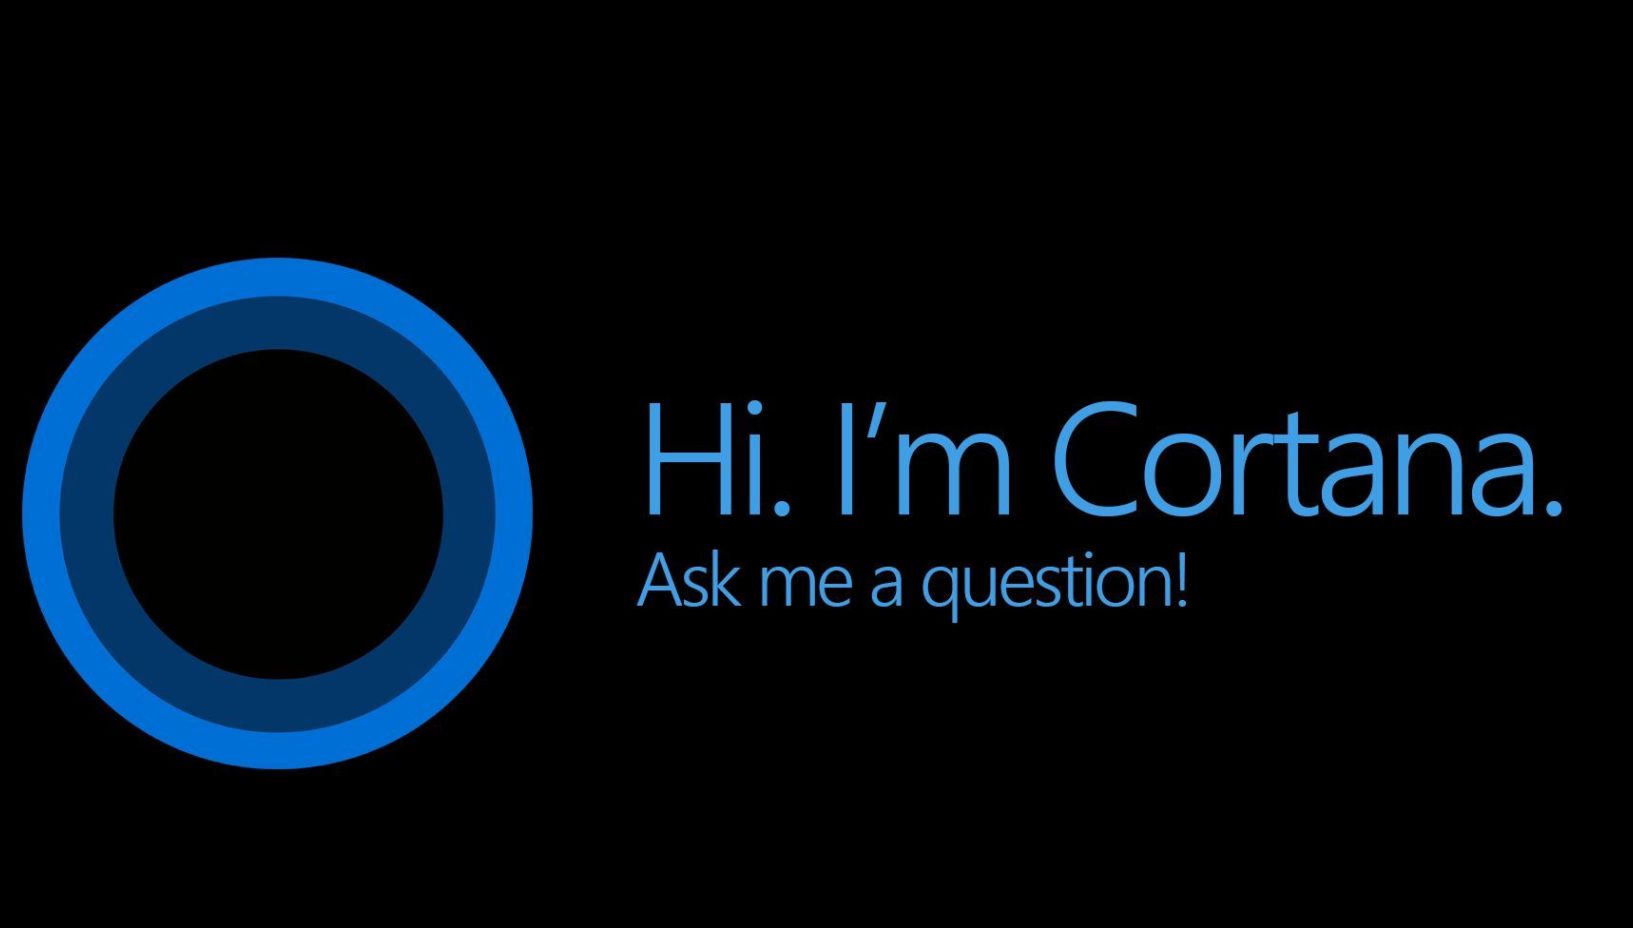 concept envisions Cortana as productivity assistant